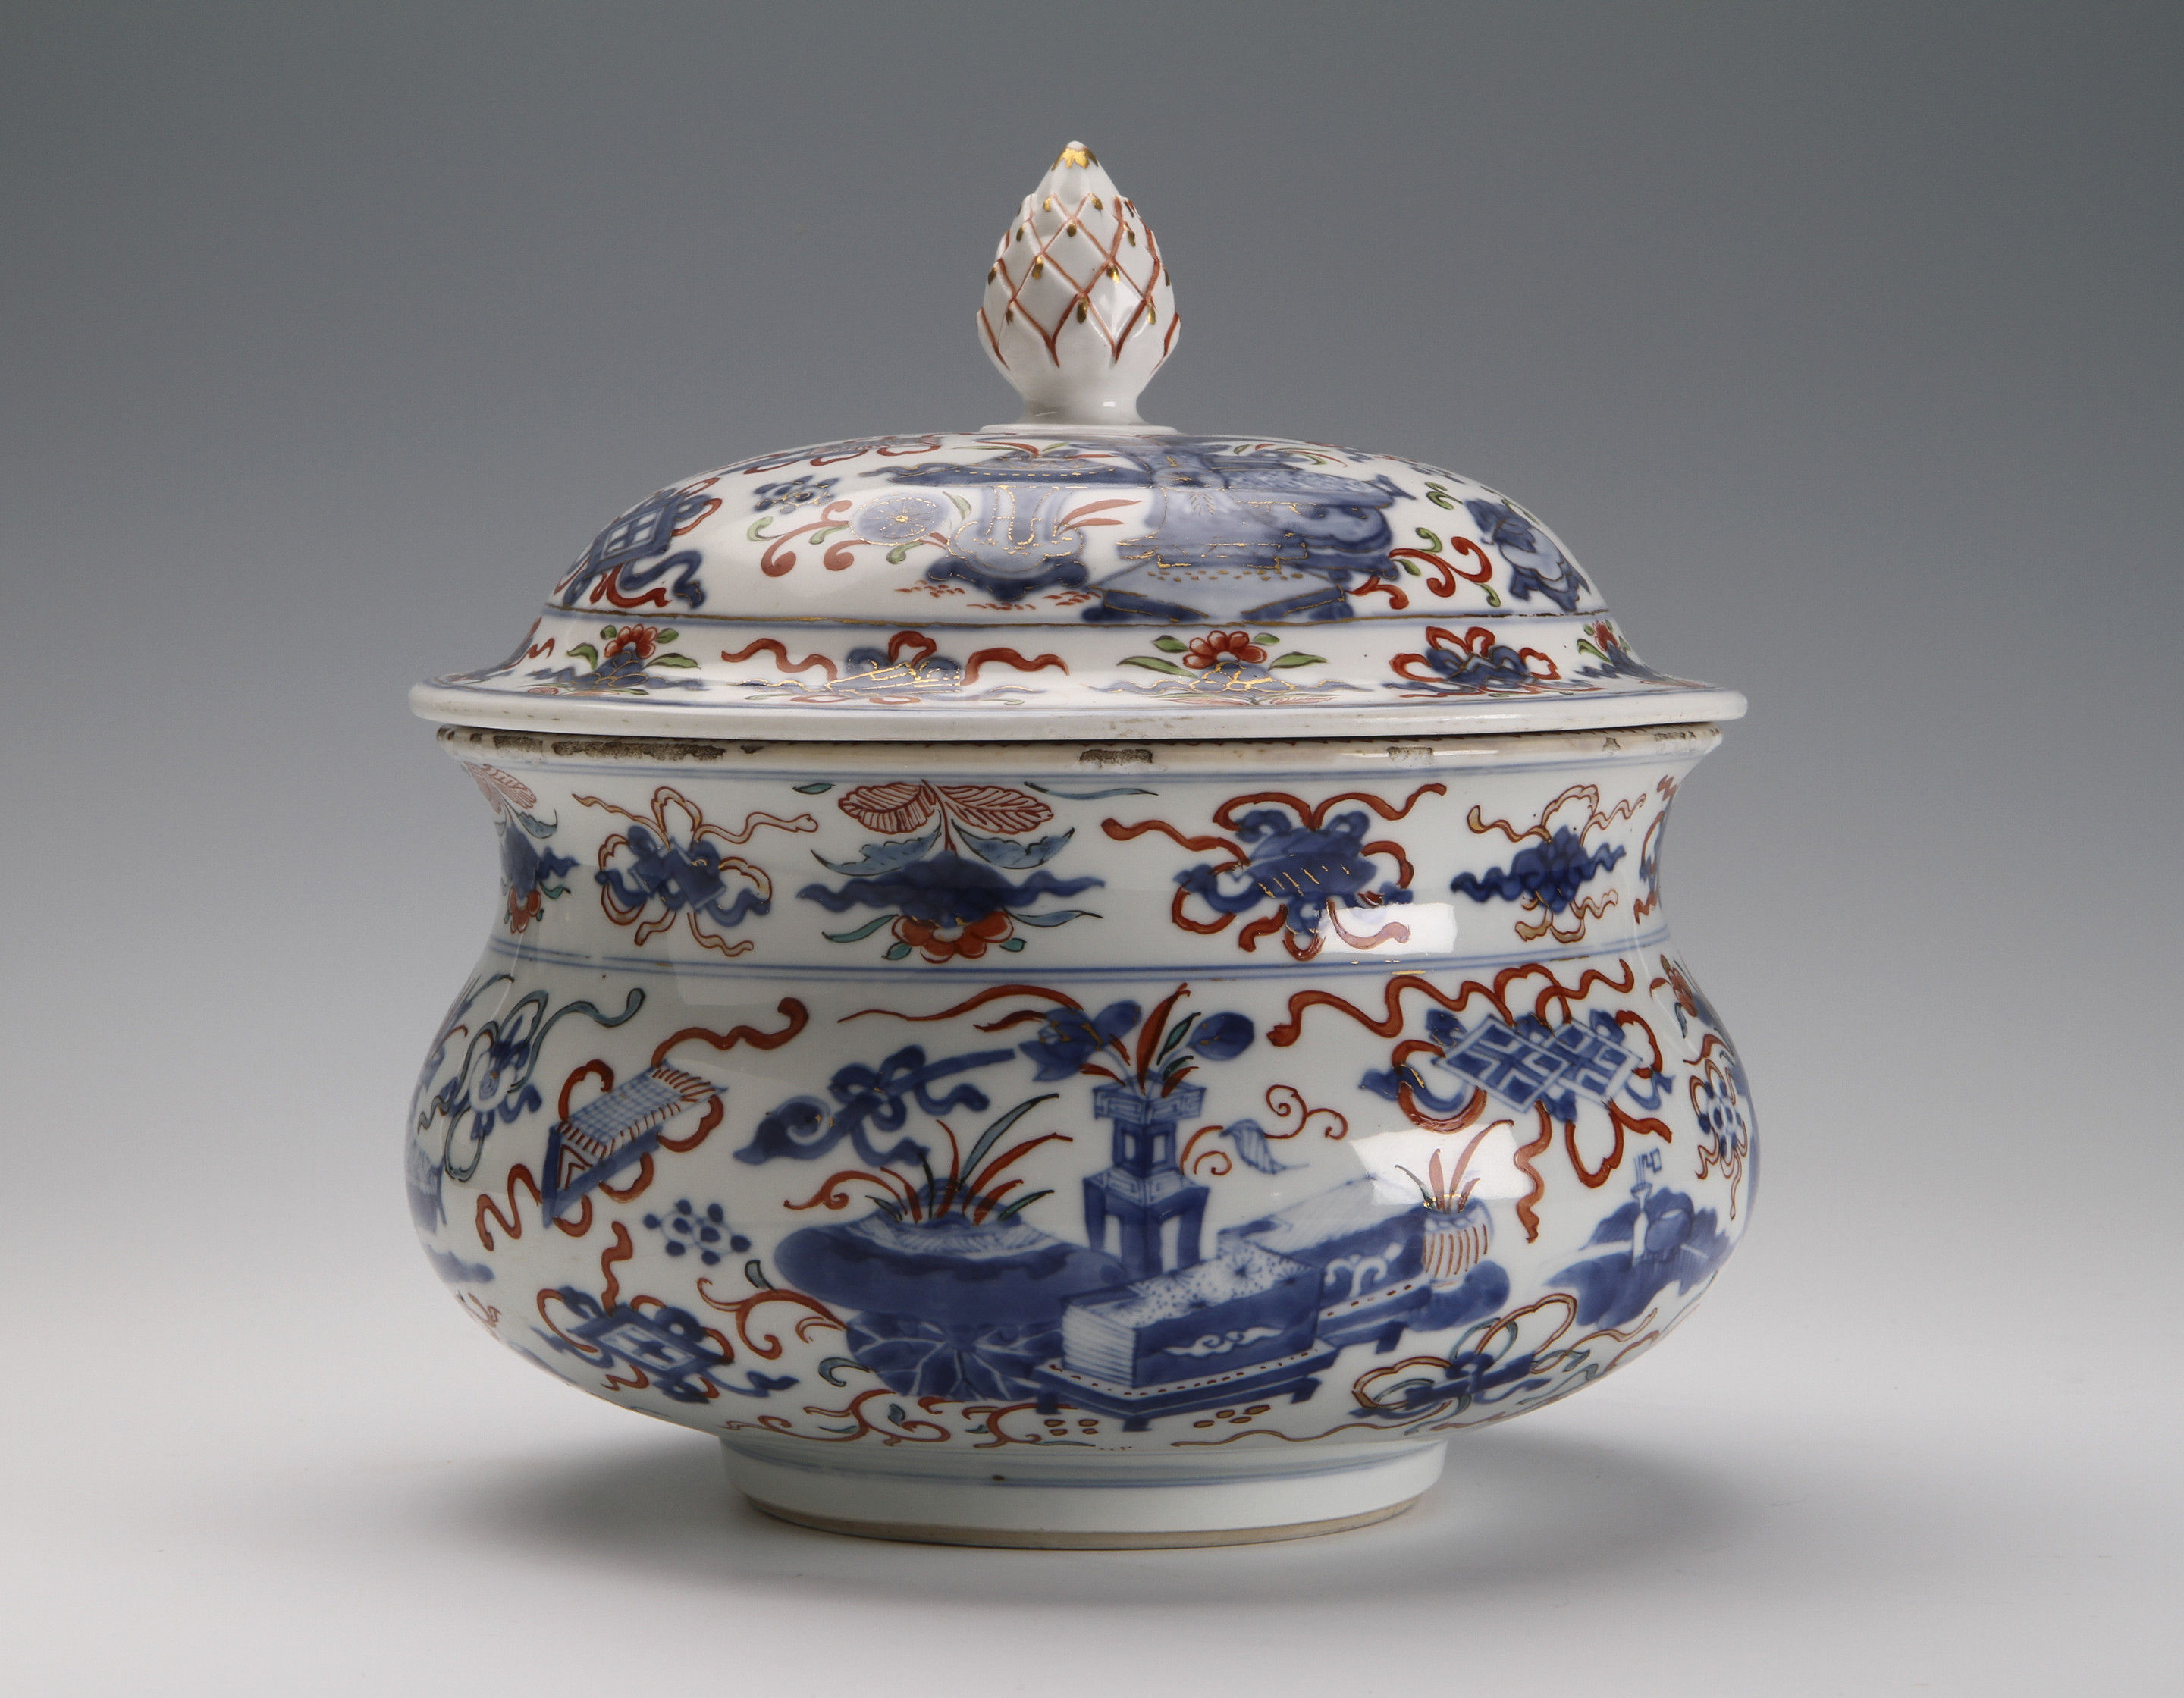 A Chinese blue and white censer with over-glaze enamels added in Holland and a cover made in Vienna at the Du Paquier Factory